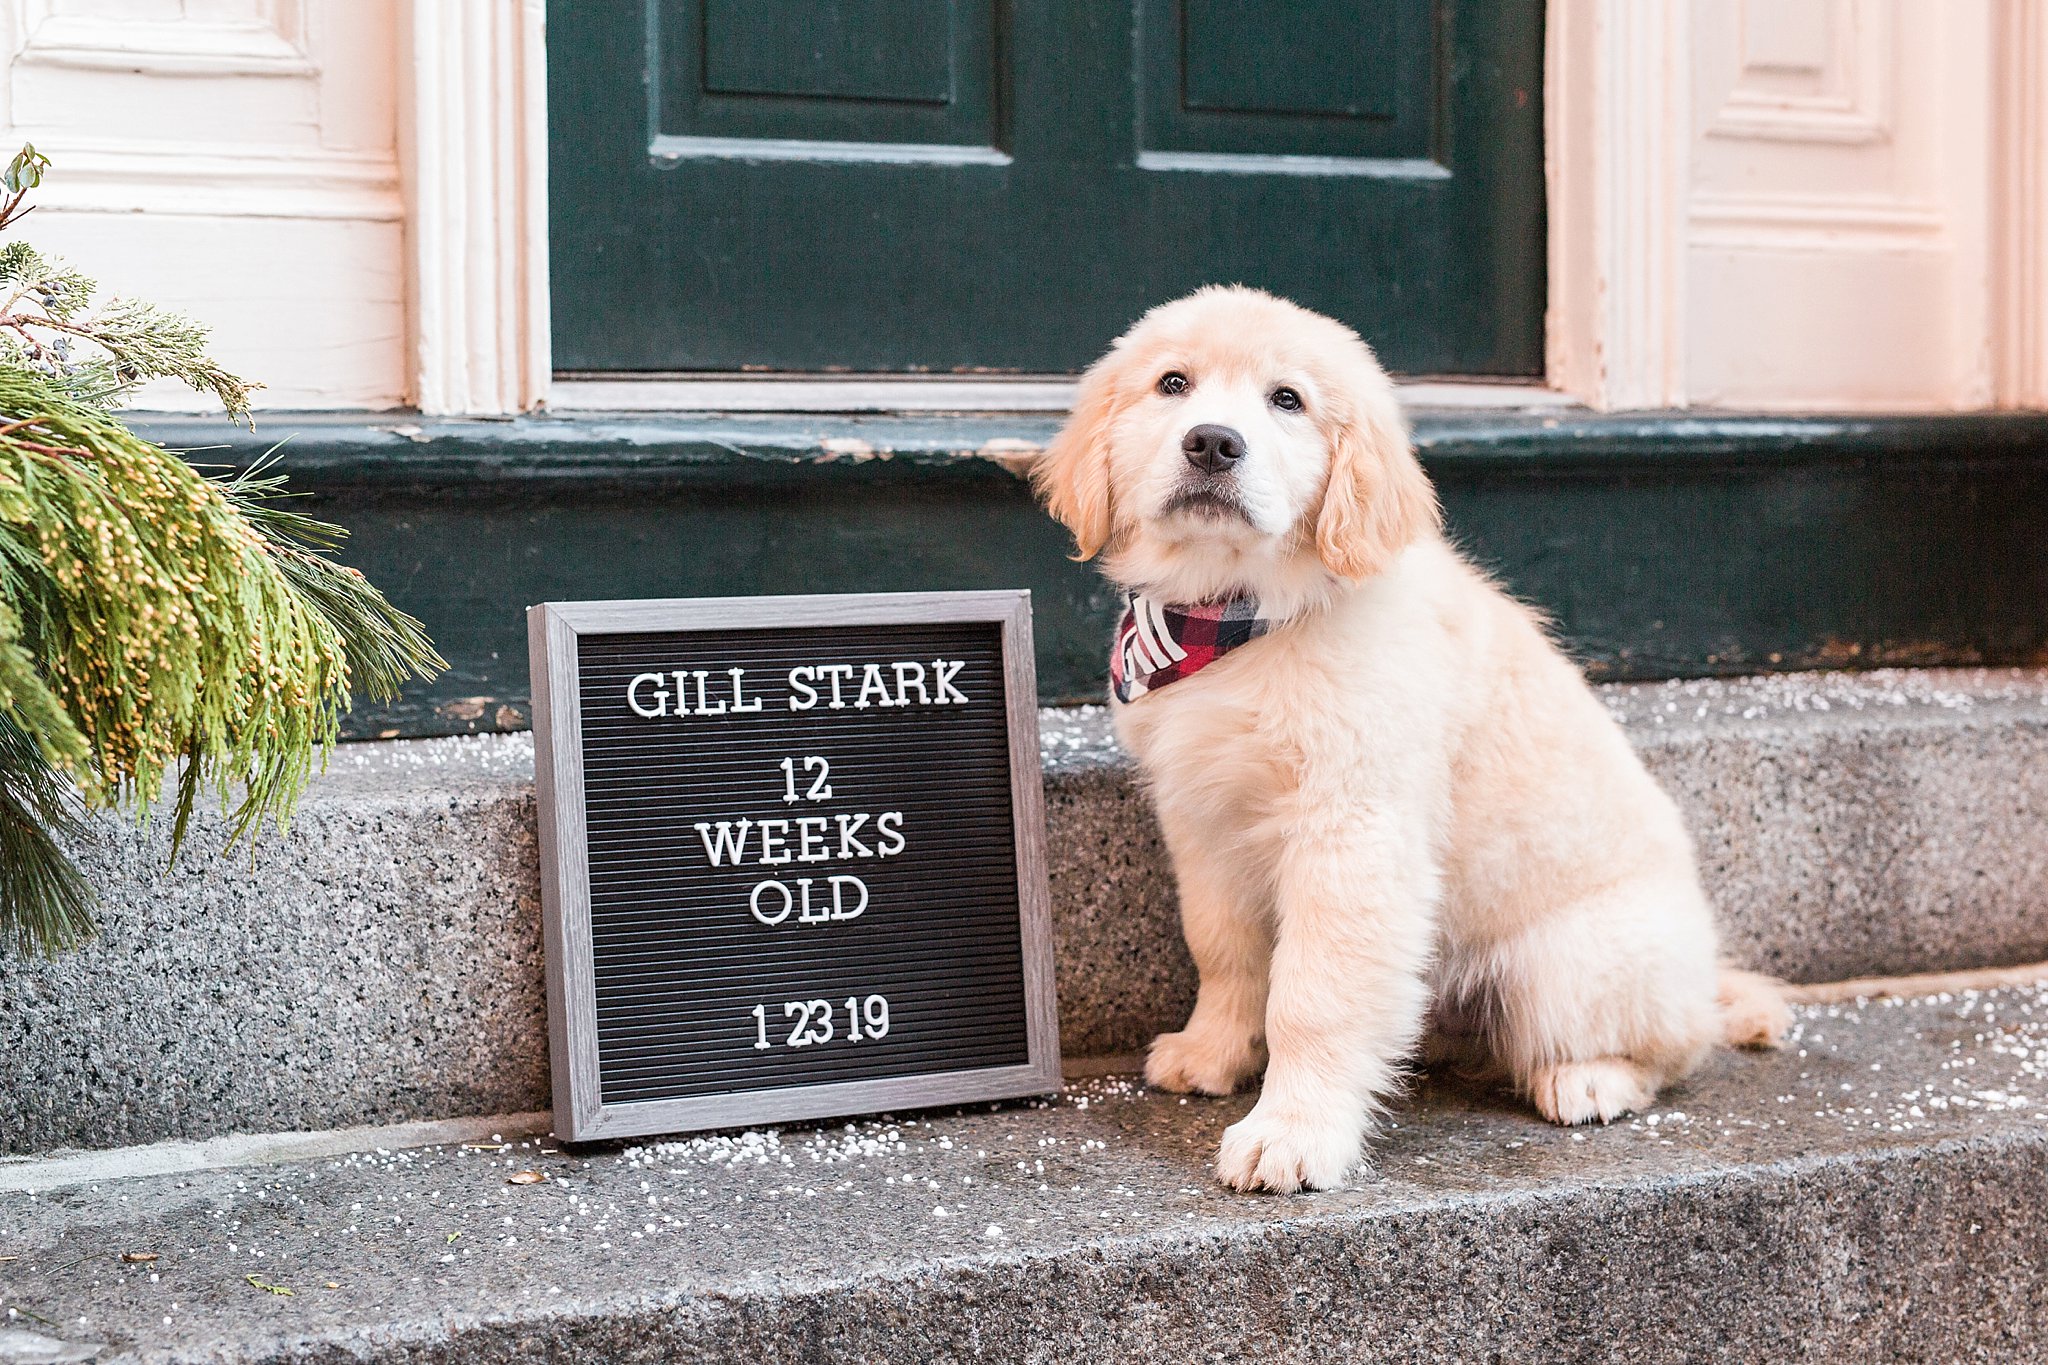 golden retriever puppy sitting next to a sign in the streets of Beacon Hill, Boston